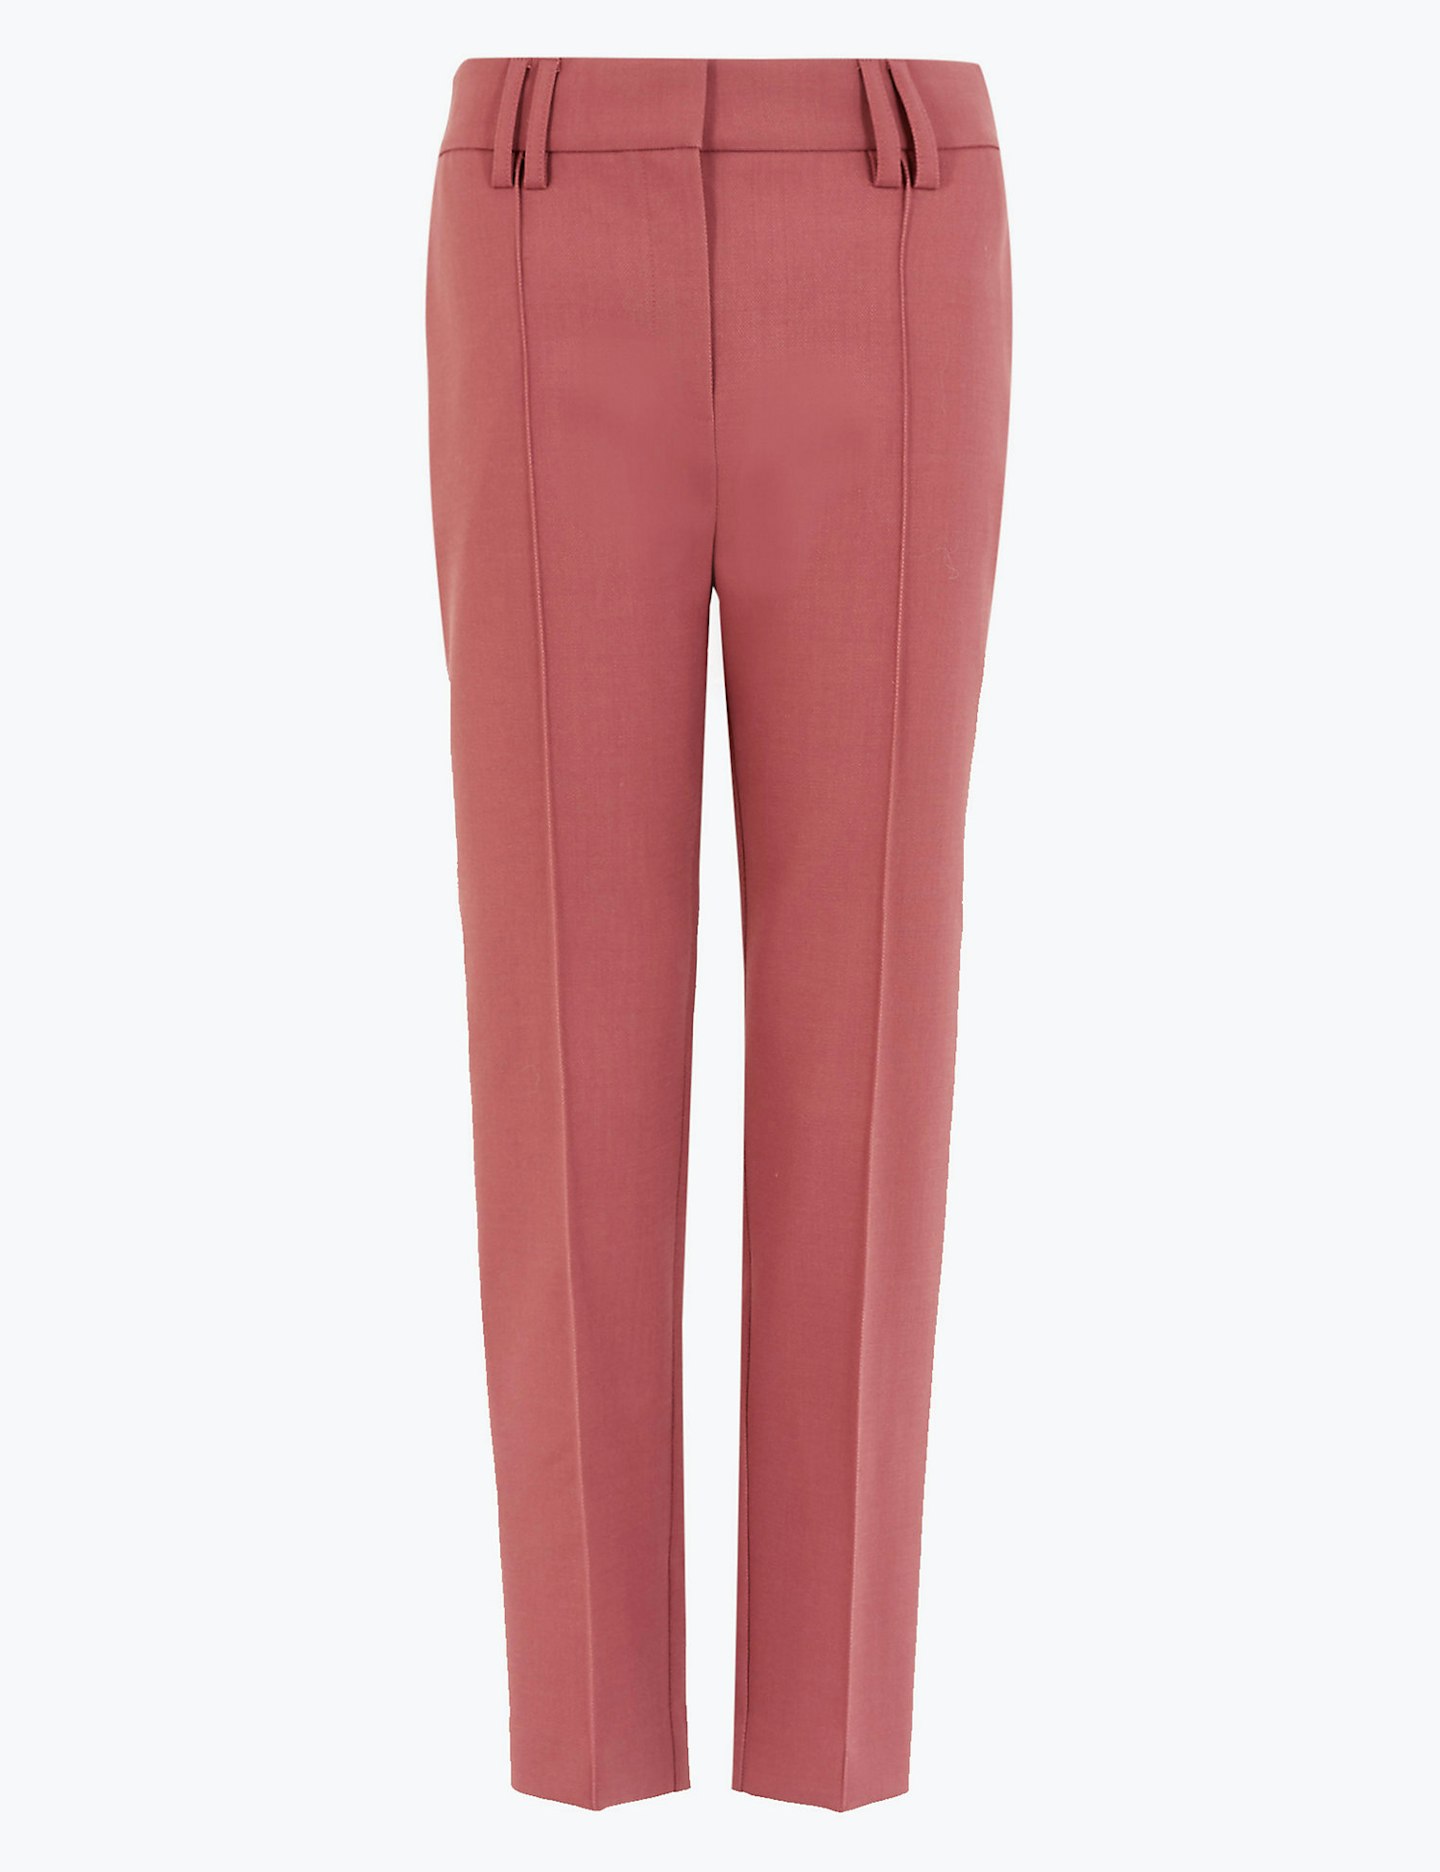 Autograph at M&S, Wool Blend Slim Leg Cropped Trousers, £59